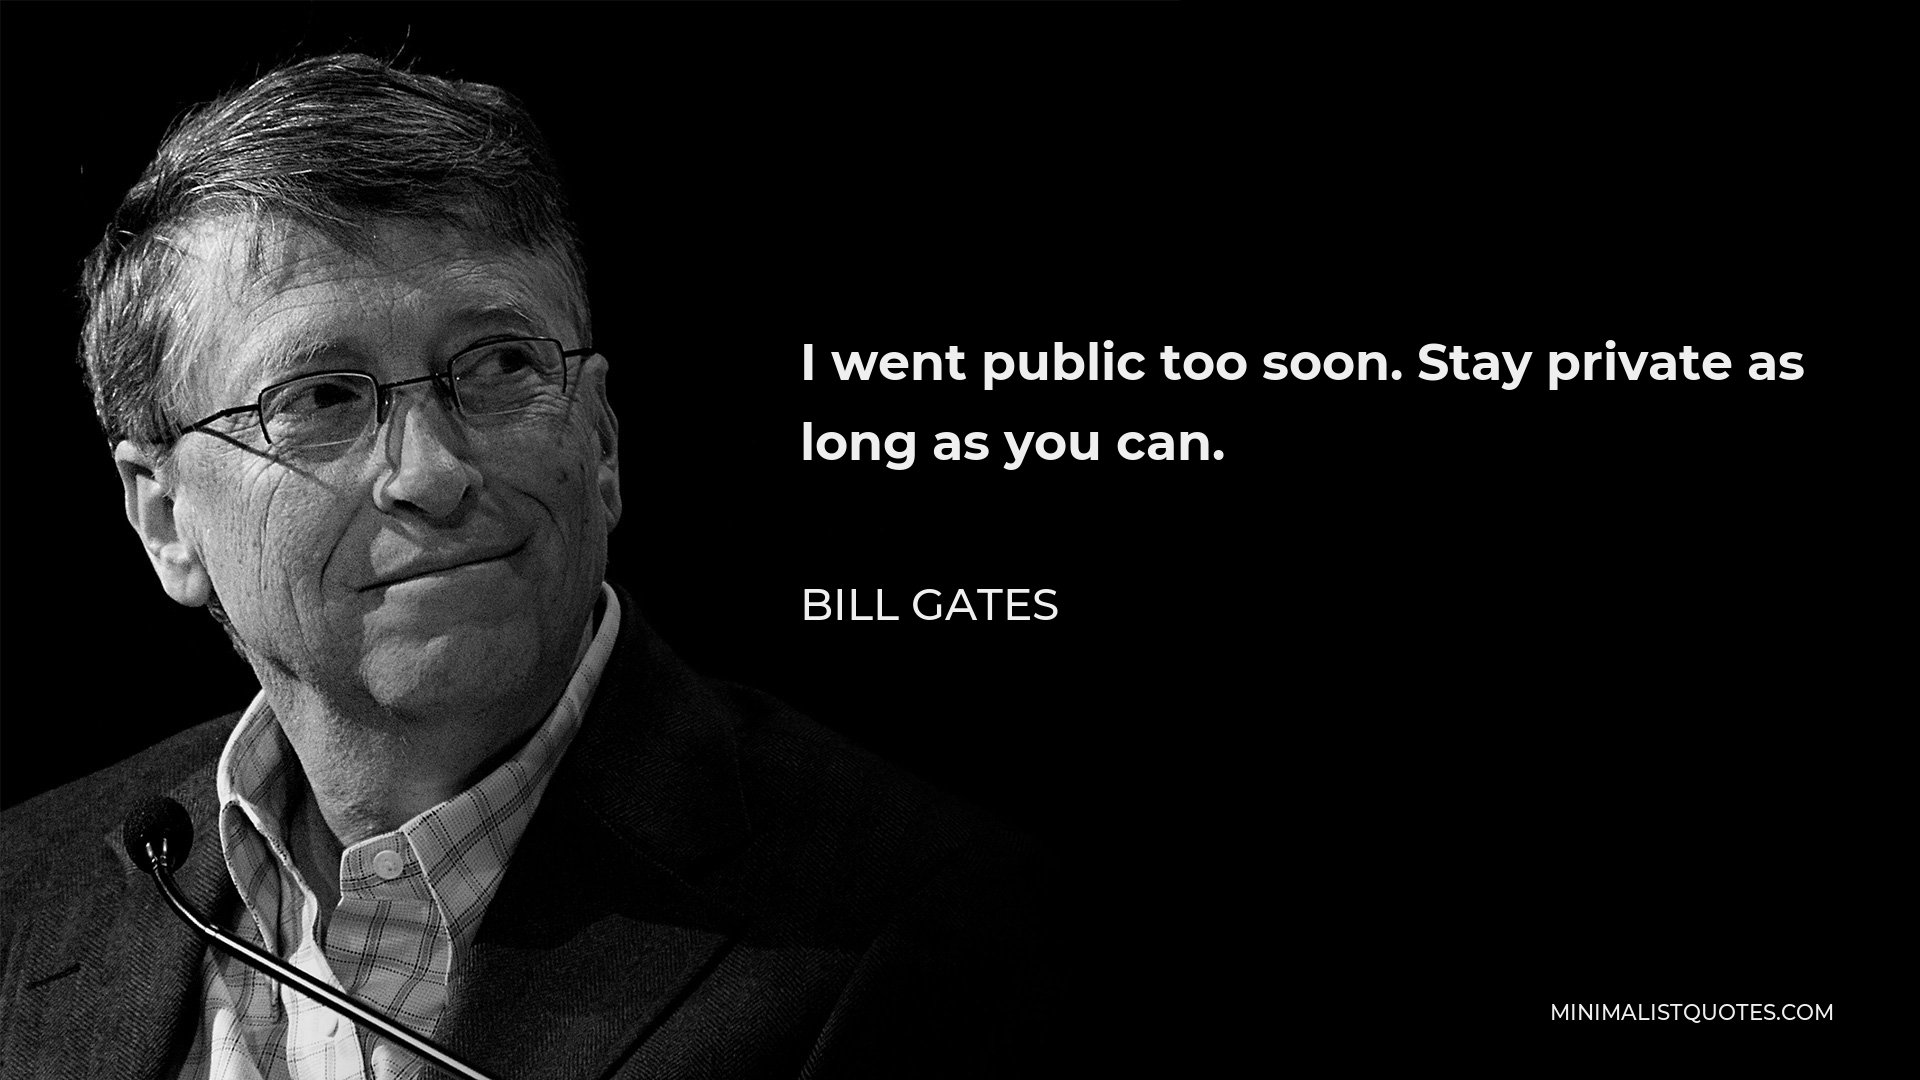 Bill Gates Quote - I went public too soon. Stay private as long as you can.